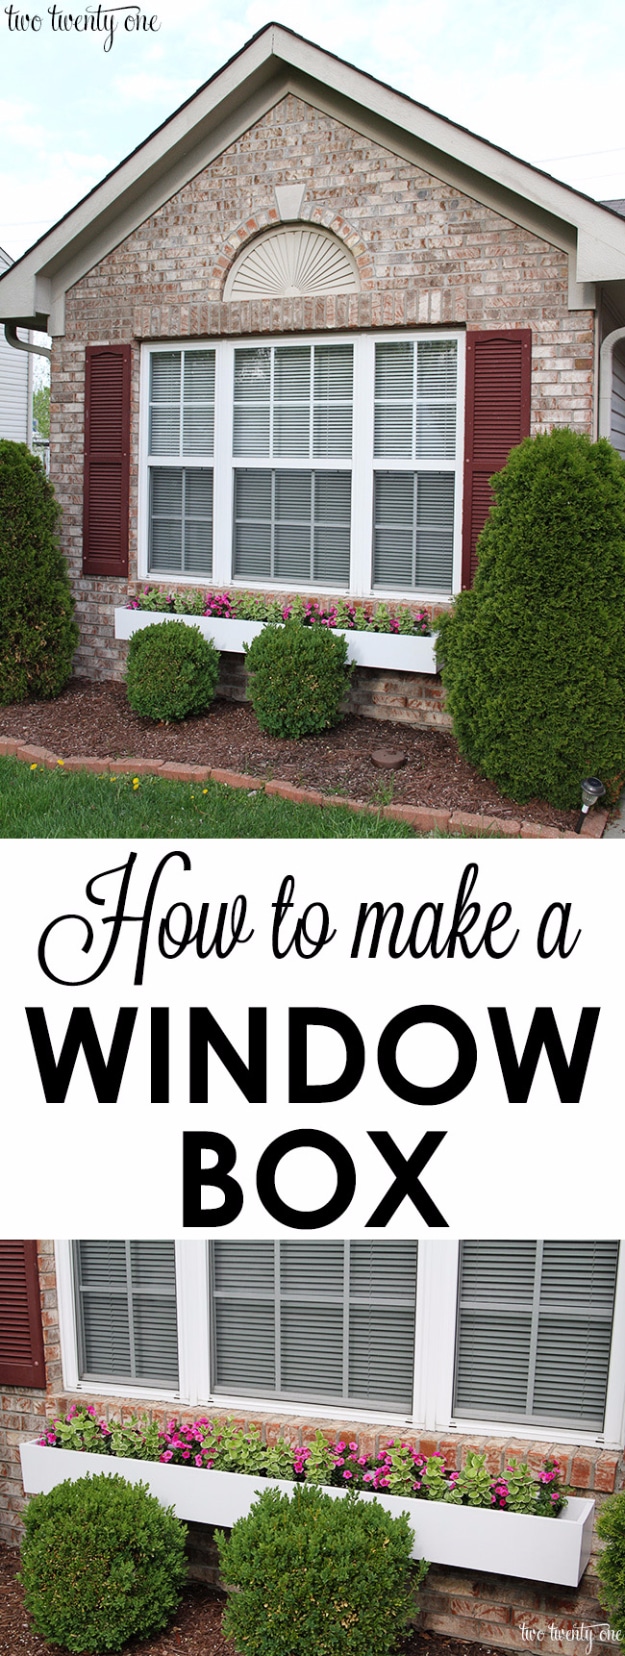 Creative Ways to Increase Curb Appeal on A Budget - DIY Window Box - Cheap and Easy Ideas for Upgrading Your Front Porch, Landscaping, Driveways, Garage Doors, Brick and Home Exteriors. Add Window Boxes, House Numbers, Mailboxes and Yard Makeovers http://diyjoy.com/diy-curb-appeal-ideas